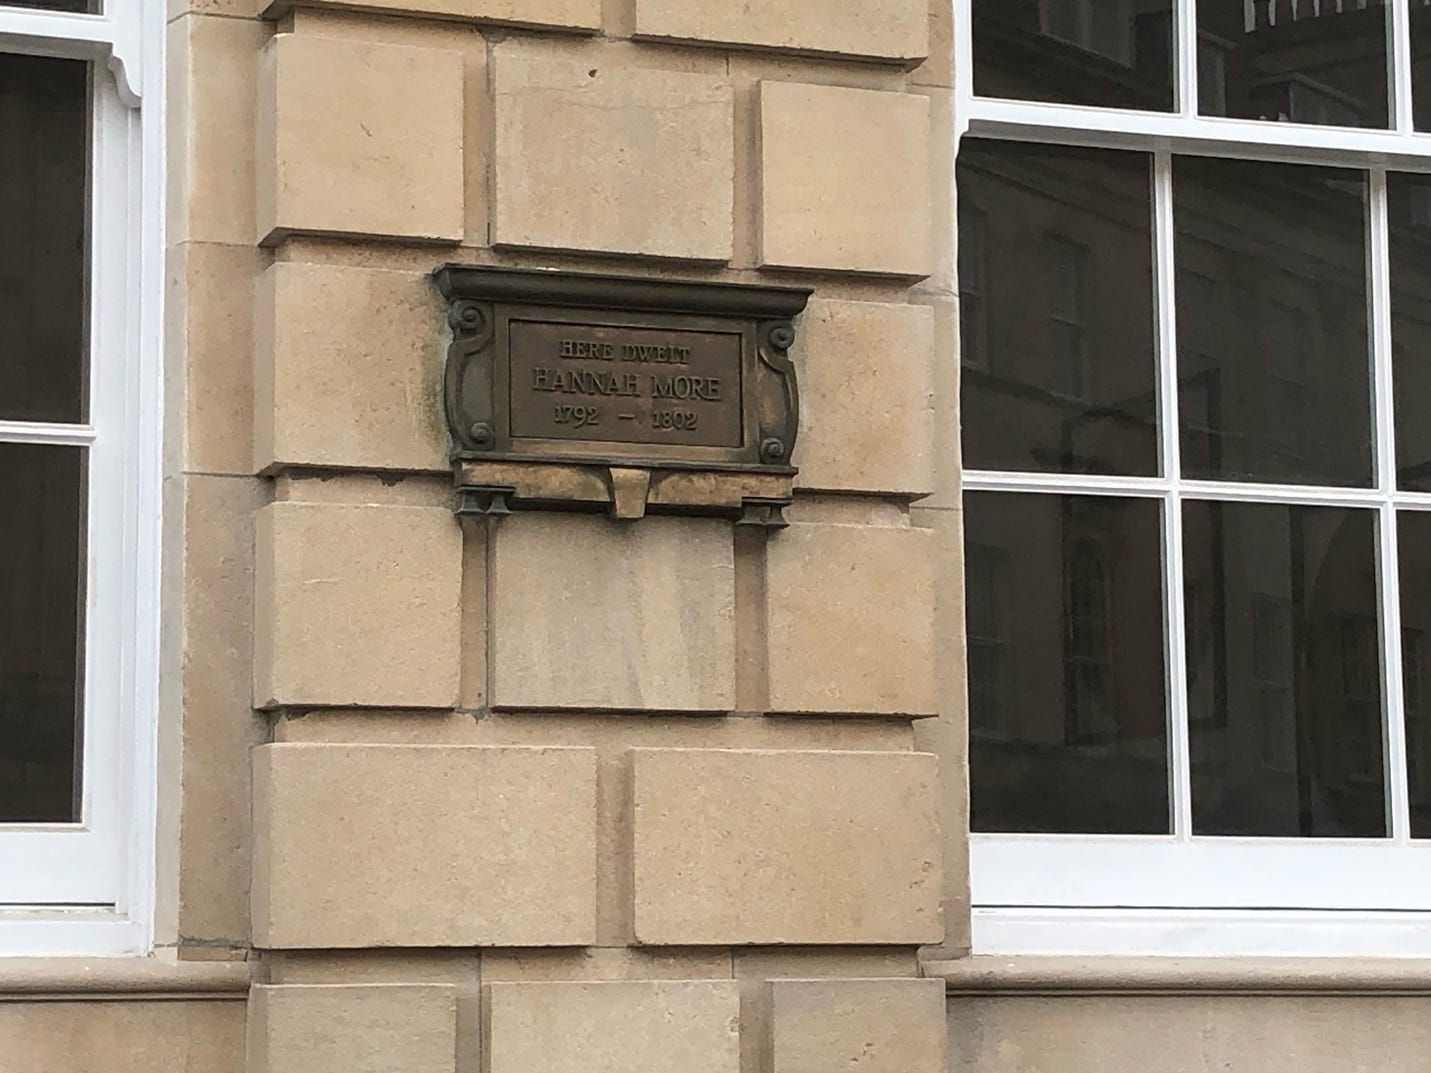 A sign on a building

Description automatically generated with low confidence